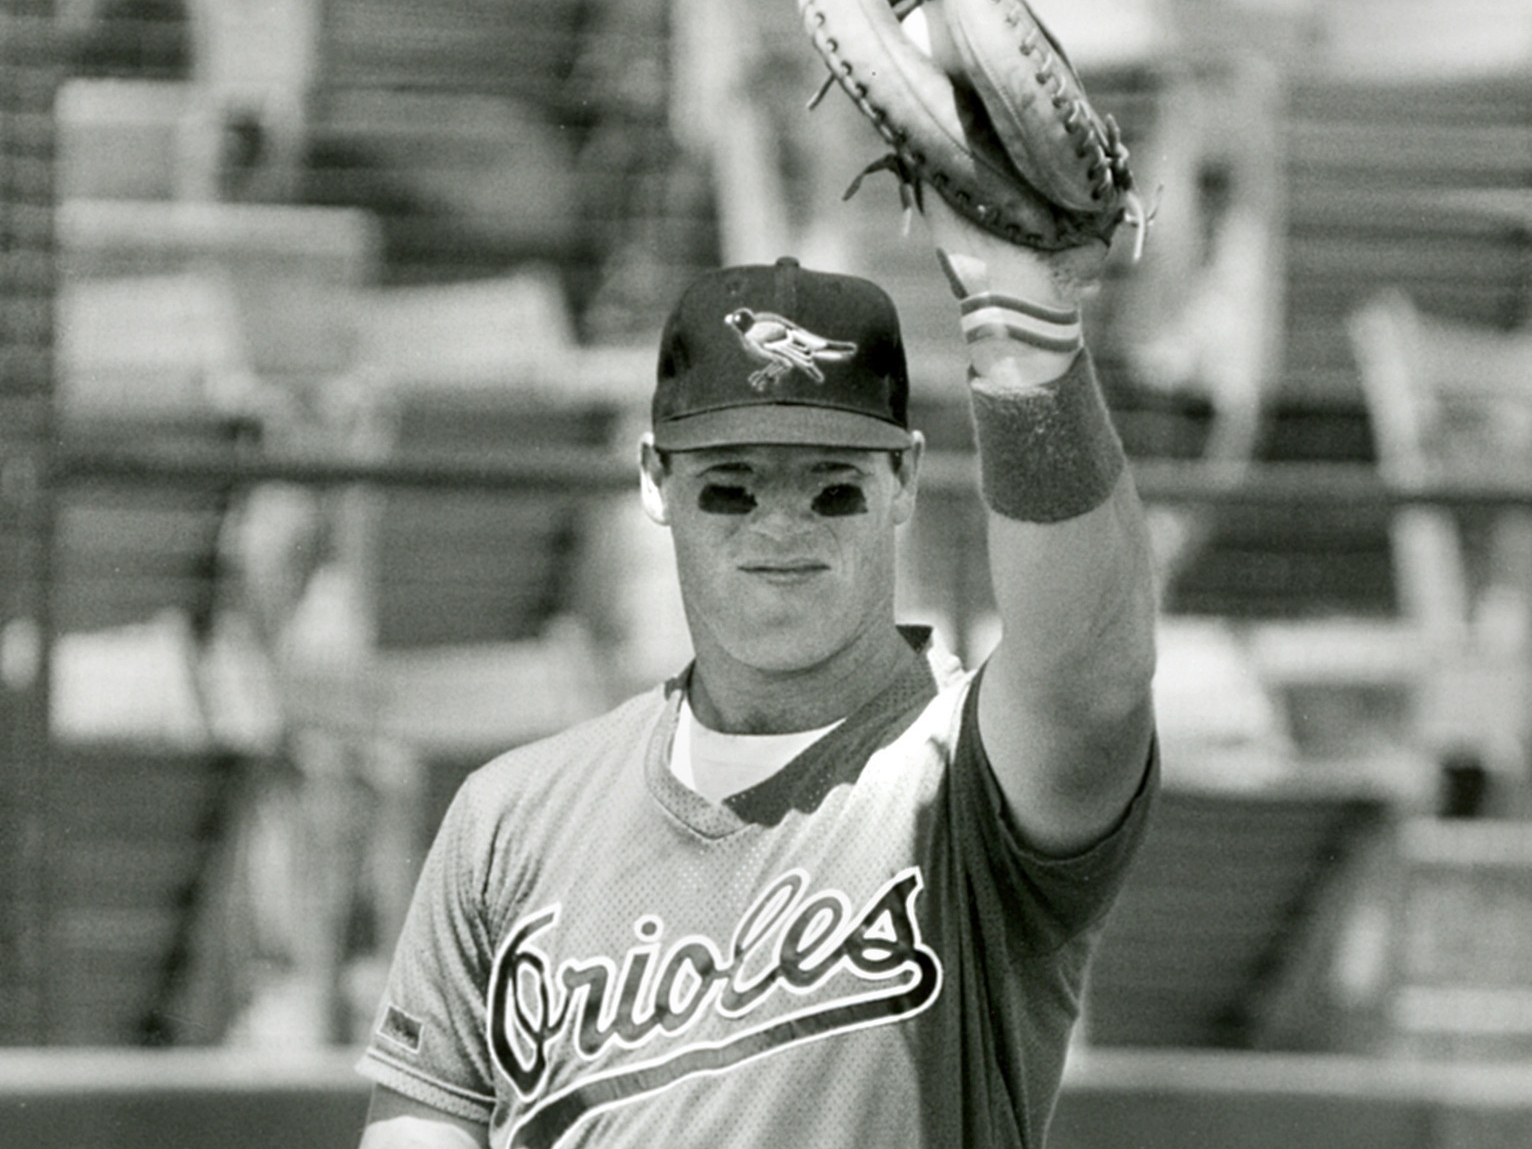 A mainstay on 1989 "Why Not?" Orioles, Mickey Tettleton led team with 26 home runs.